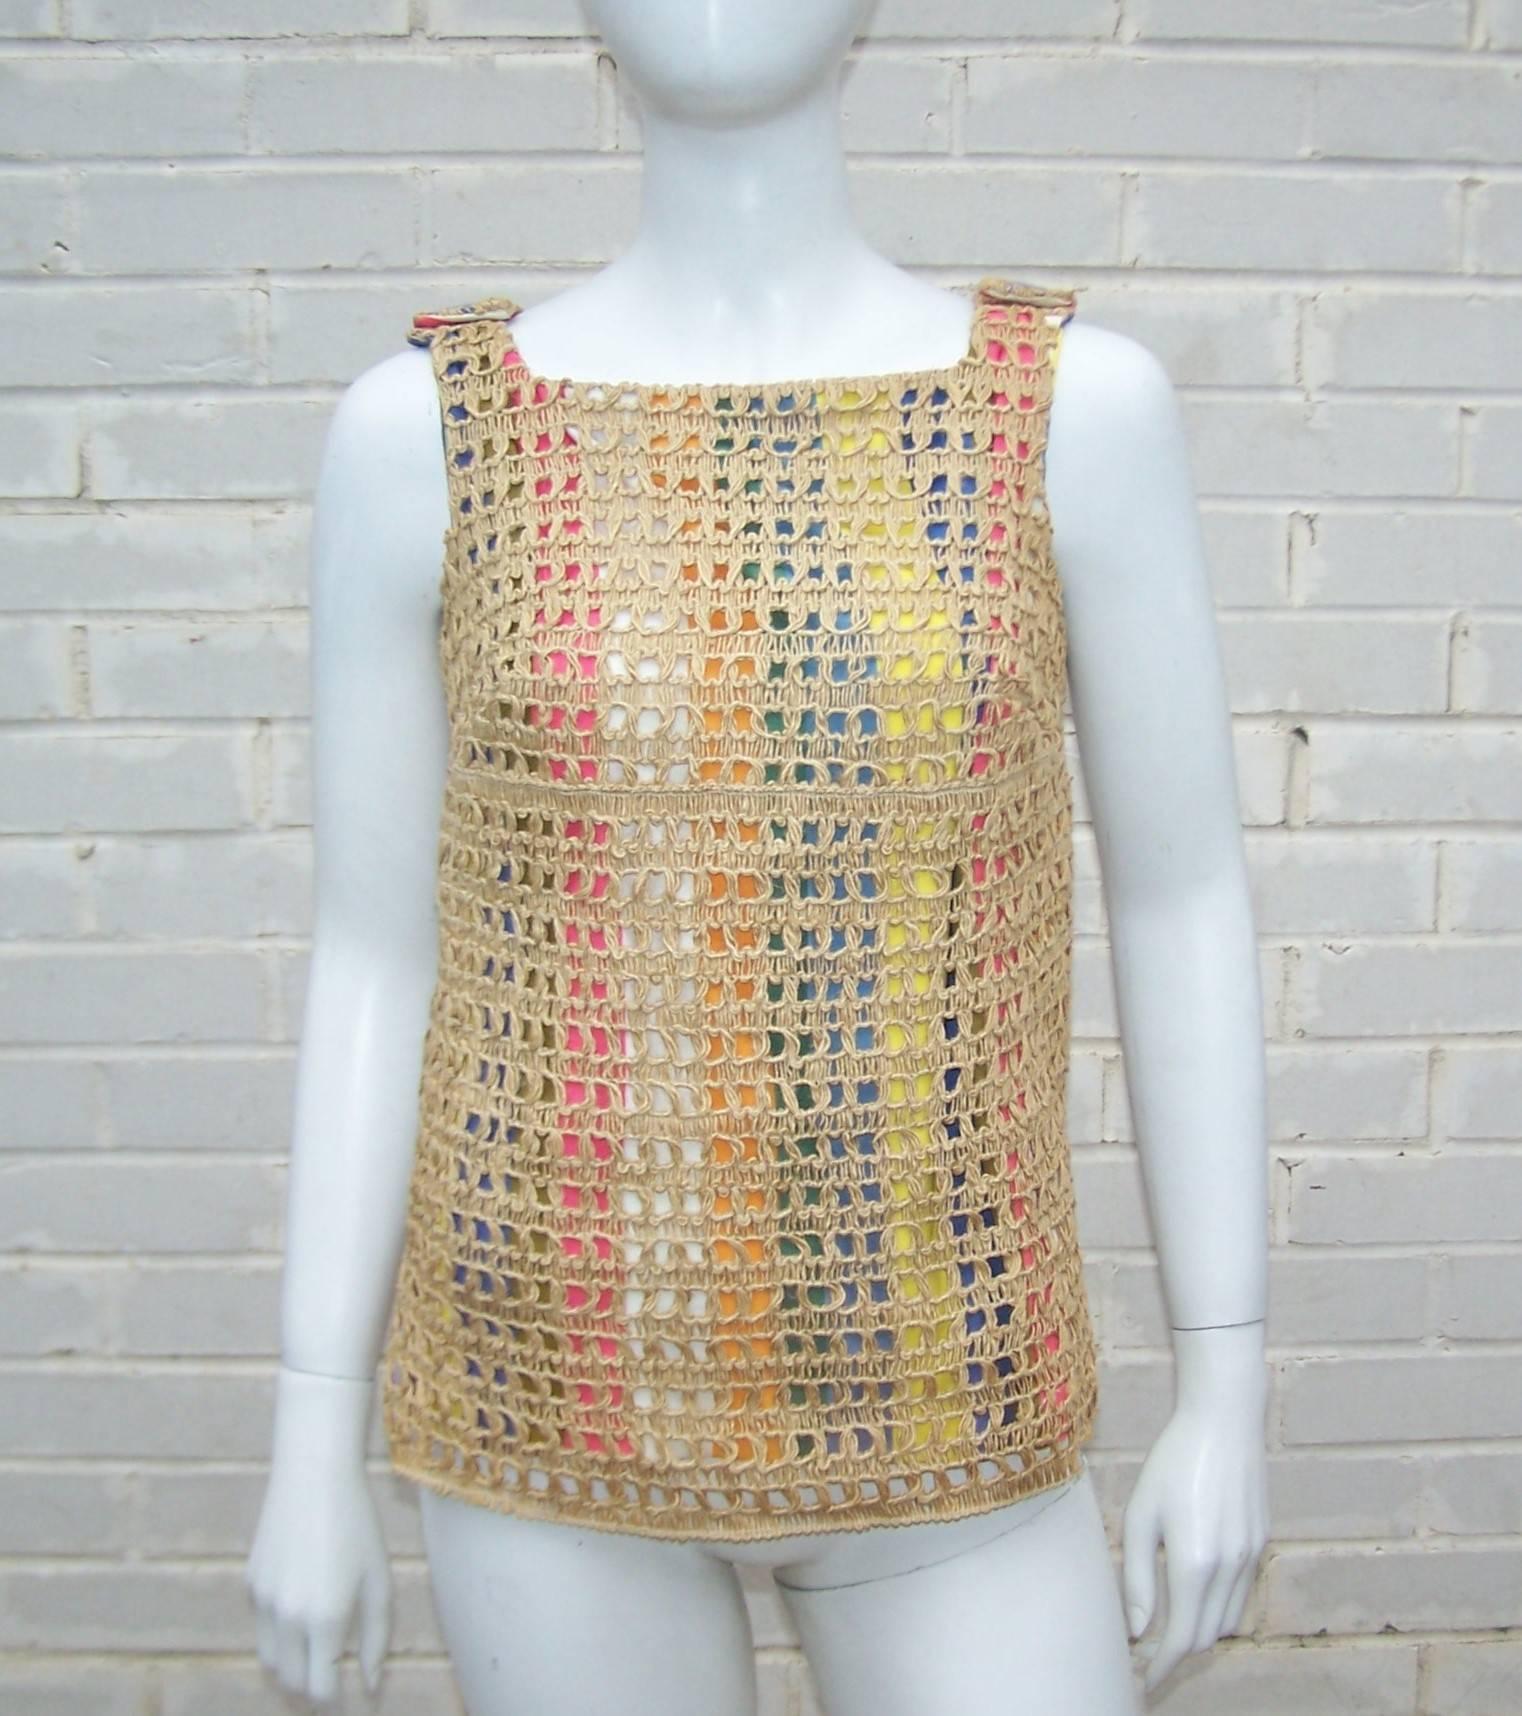 This little 1960's Stracci design should be vacationing on the Italian Riviera.  The simple pullover sleeveless top created by layering colorful striped cotton canvas with a raffia twine overlay looks anything but simple.  Yet the effortless style